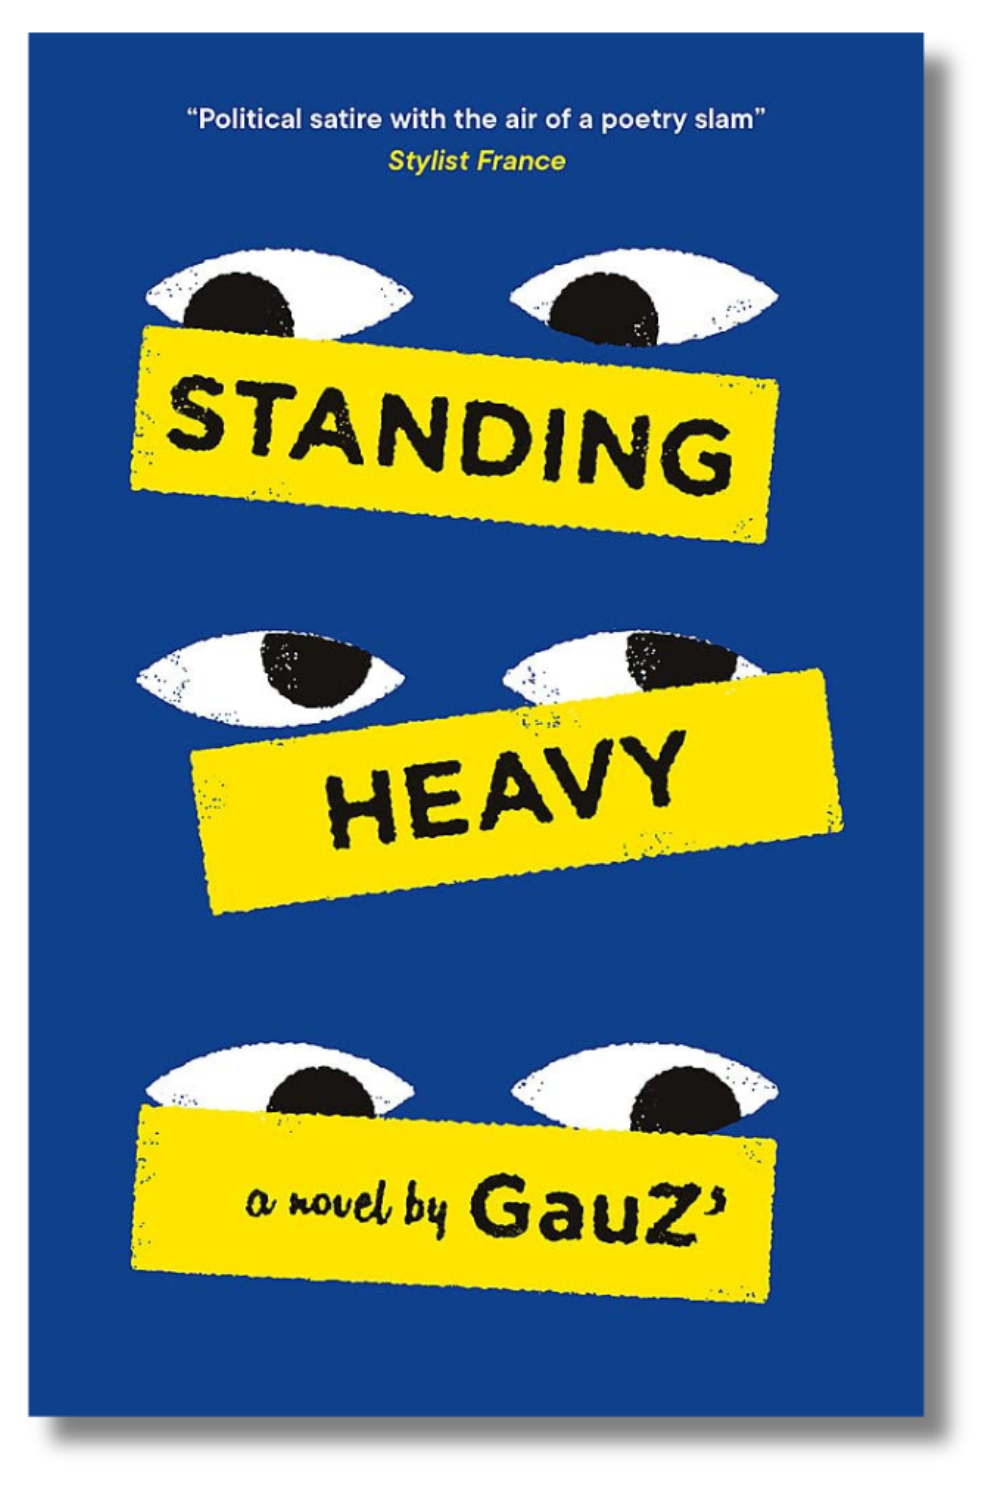 The cover of "Standing Heavy" by Gauz', translated by Frank Wynne